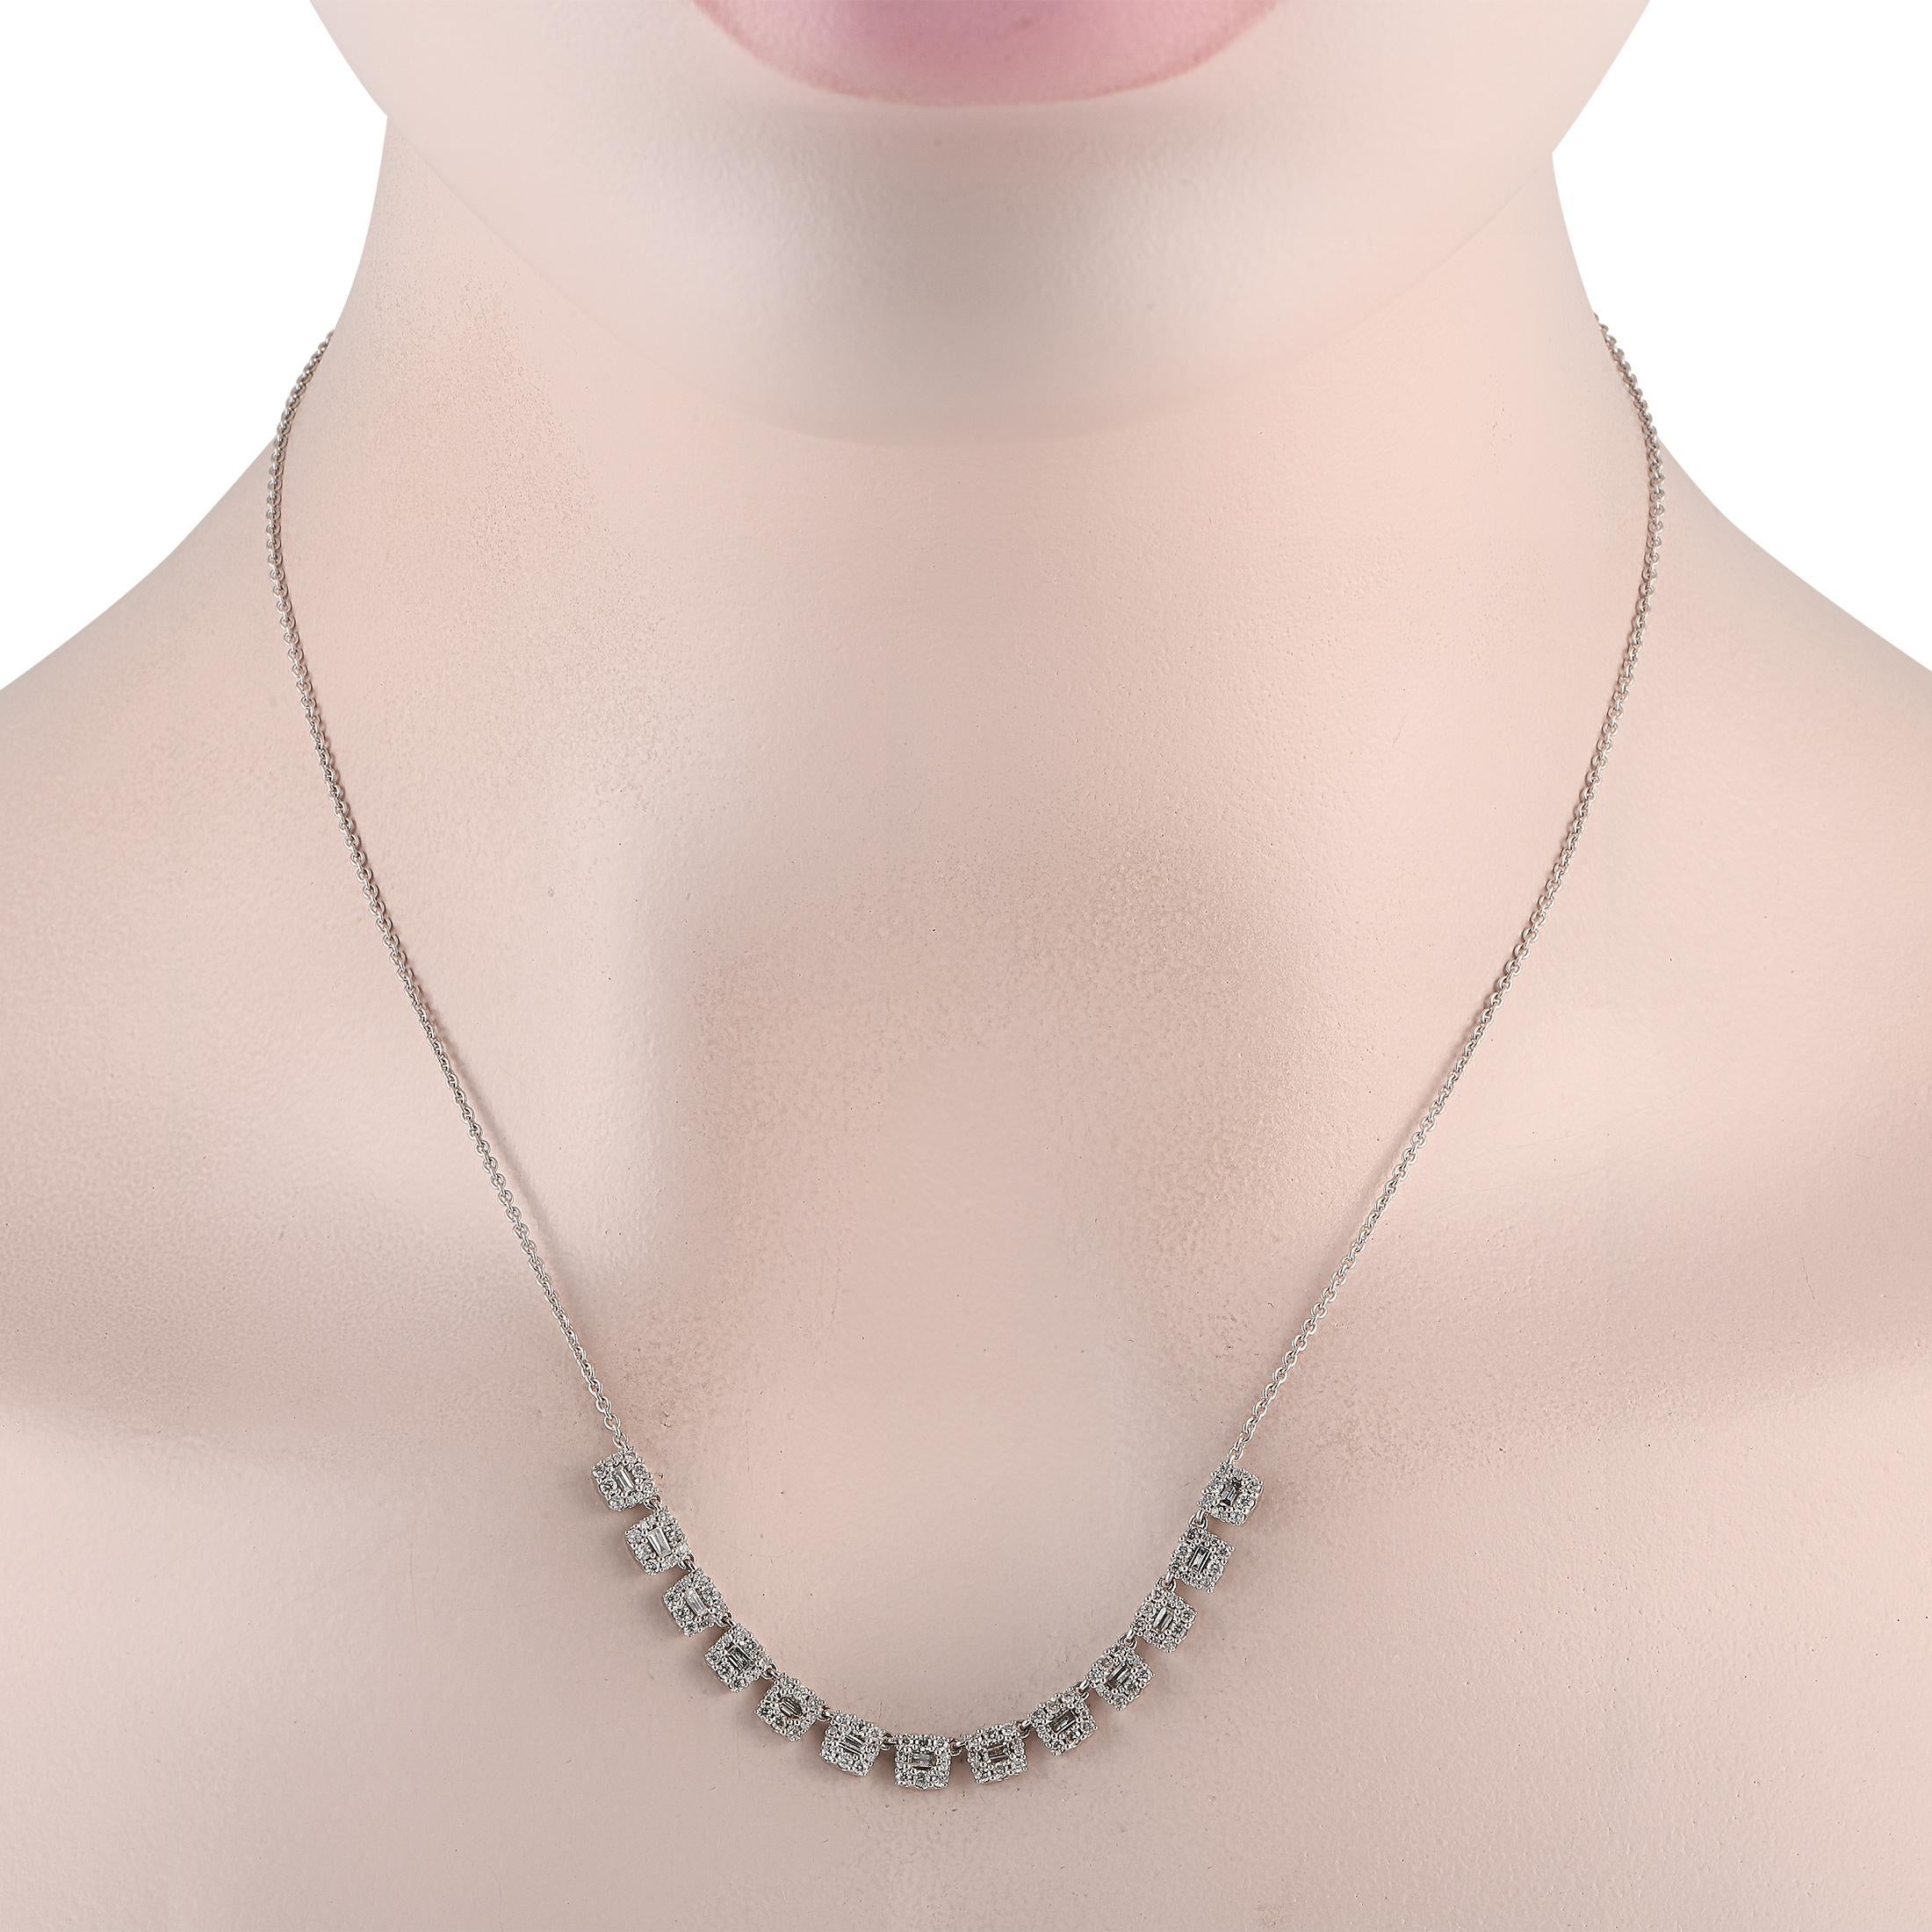 Here is a modern diamond fringe necklace to help you keep your accessorizing game interesting and fresh. This white gold piece features a series of short and square-shaped fringes that suspend from the chain. Each fringe features a step-cut diamond